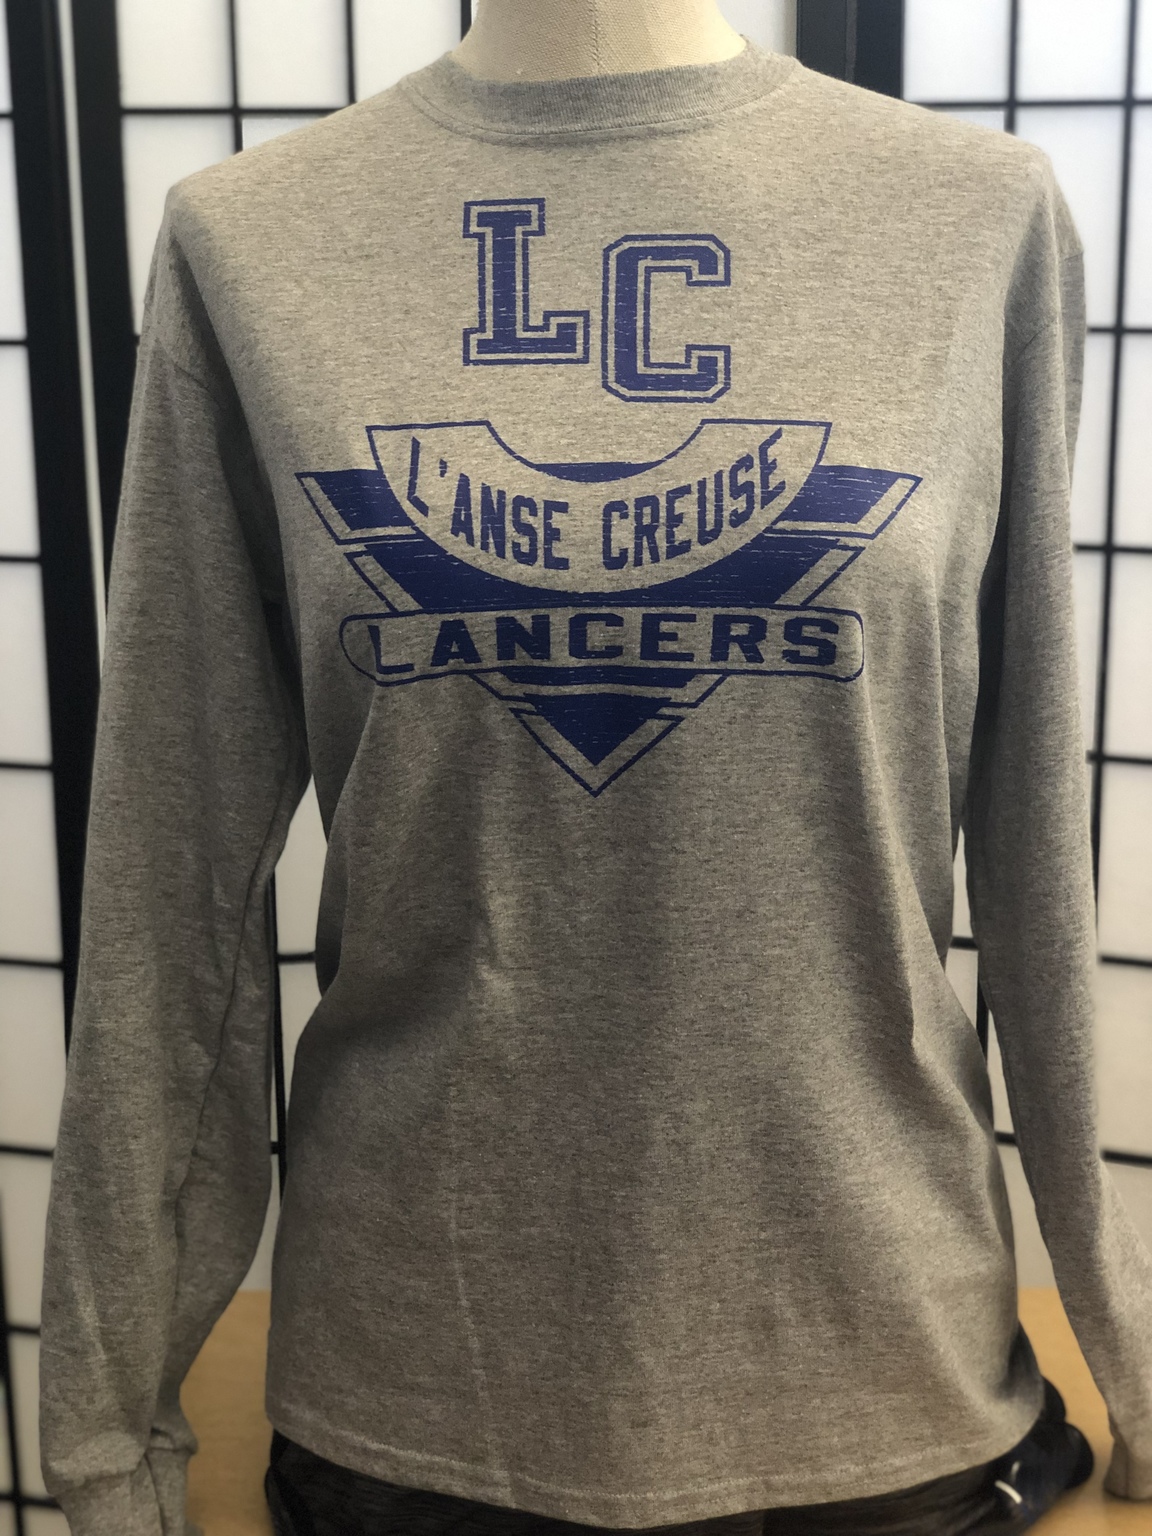 Royal L'Anse Creuse Lancers with triangle blue font